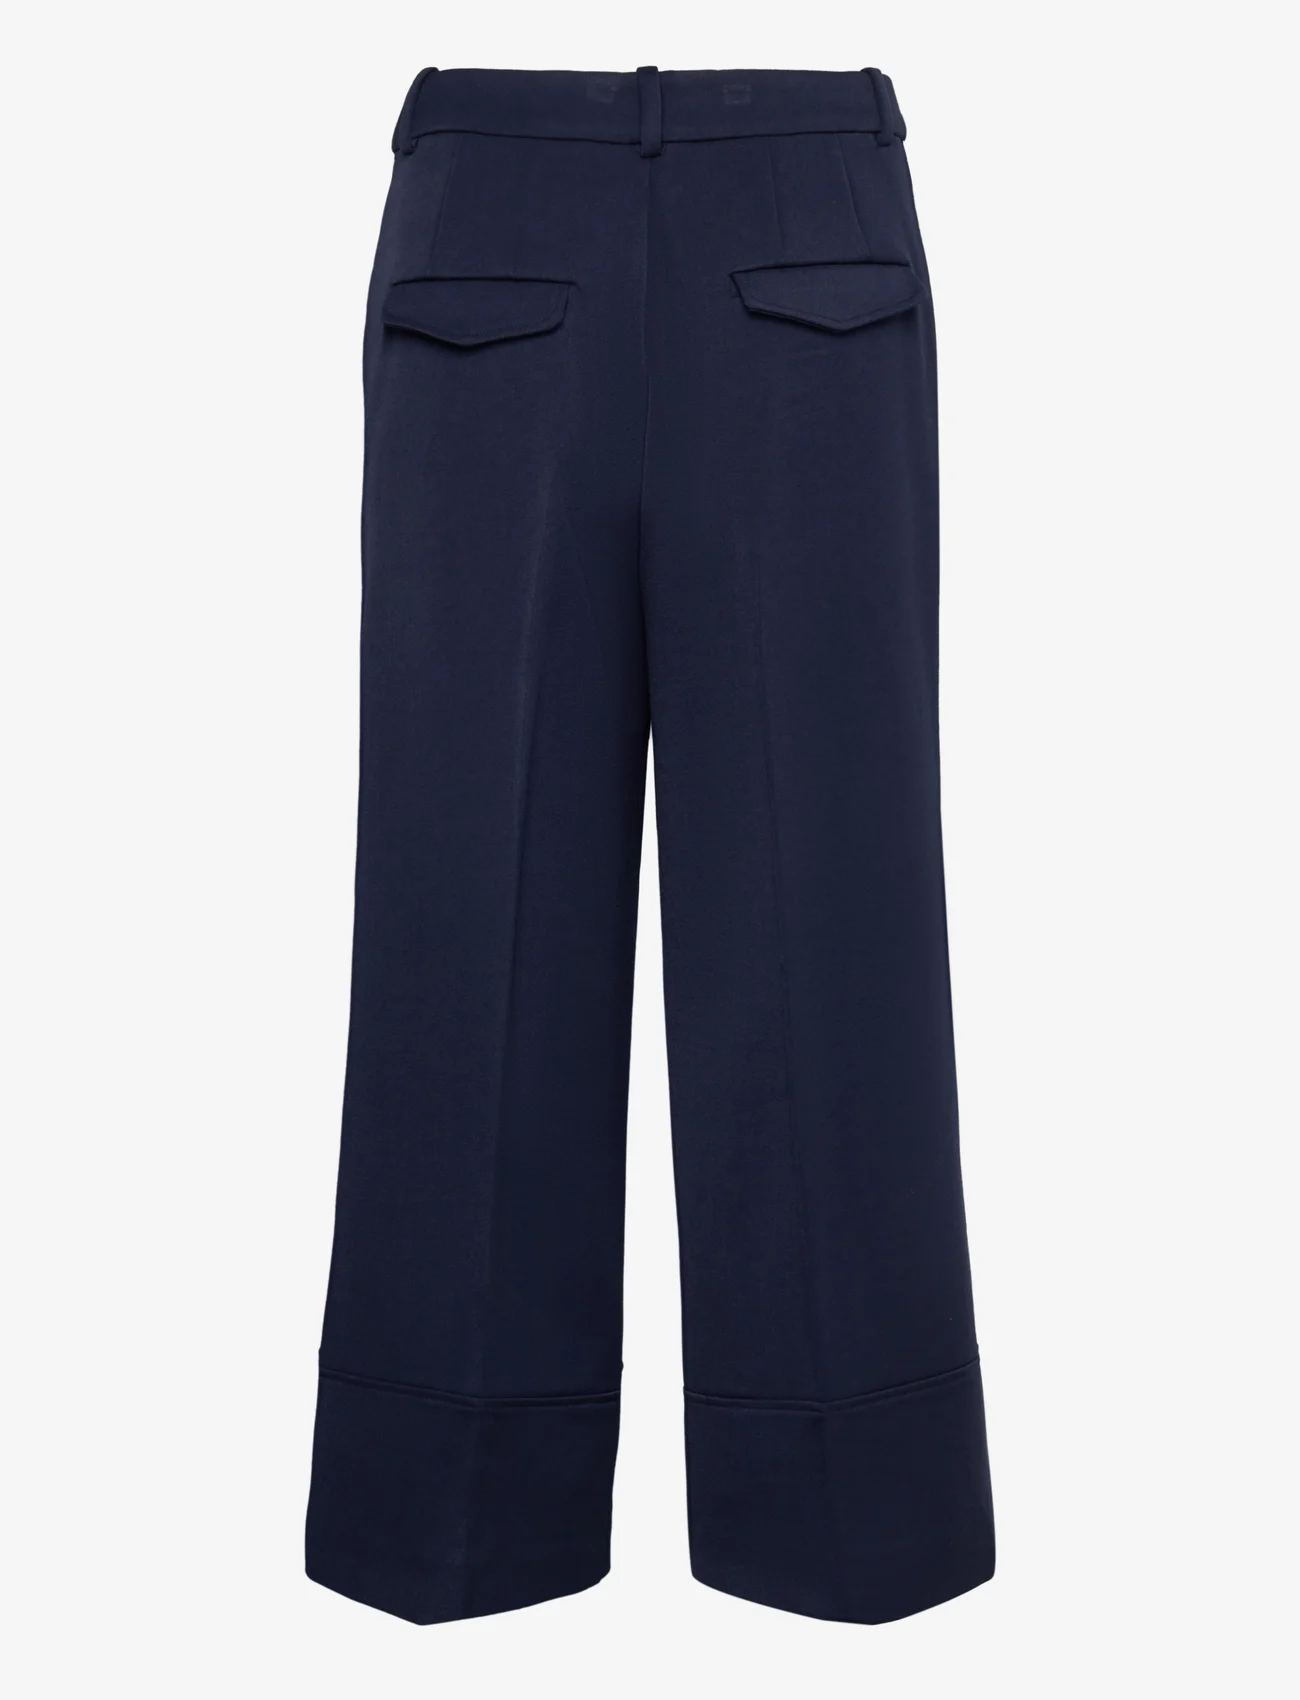 Esprit Casual - Culotte trousers with blended viscose - spodnie proste - navy - 1